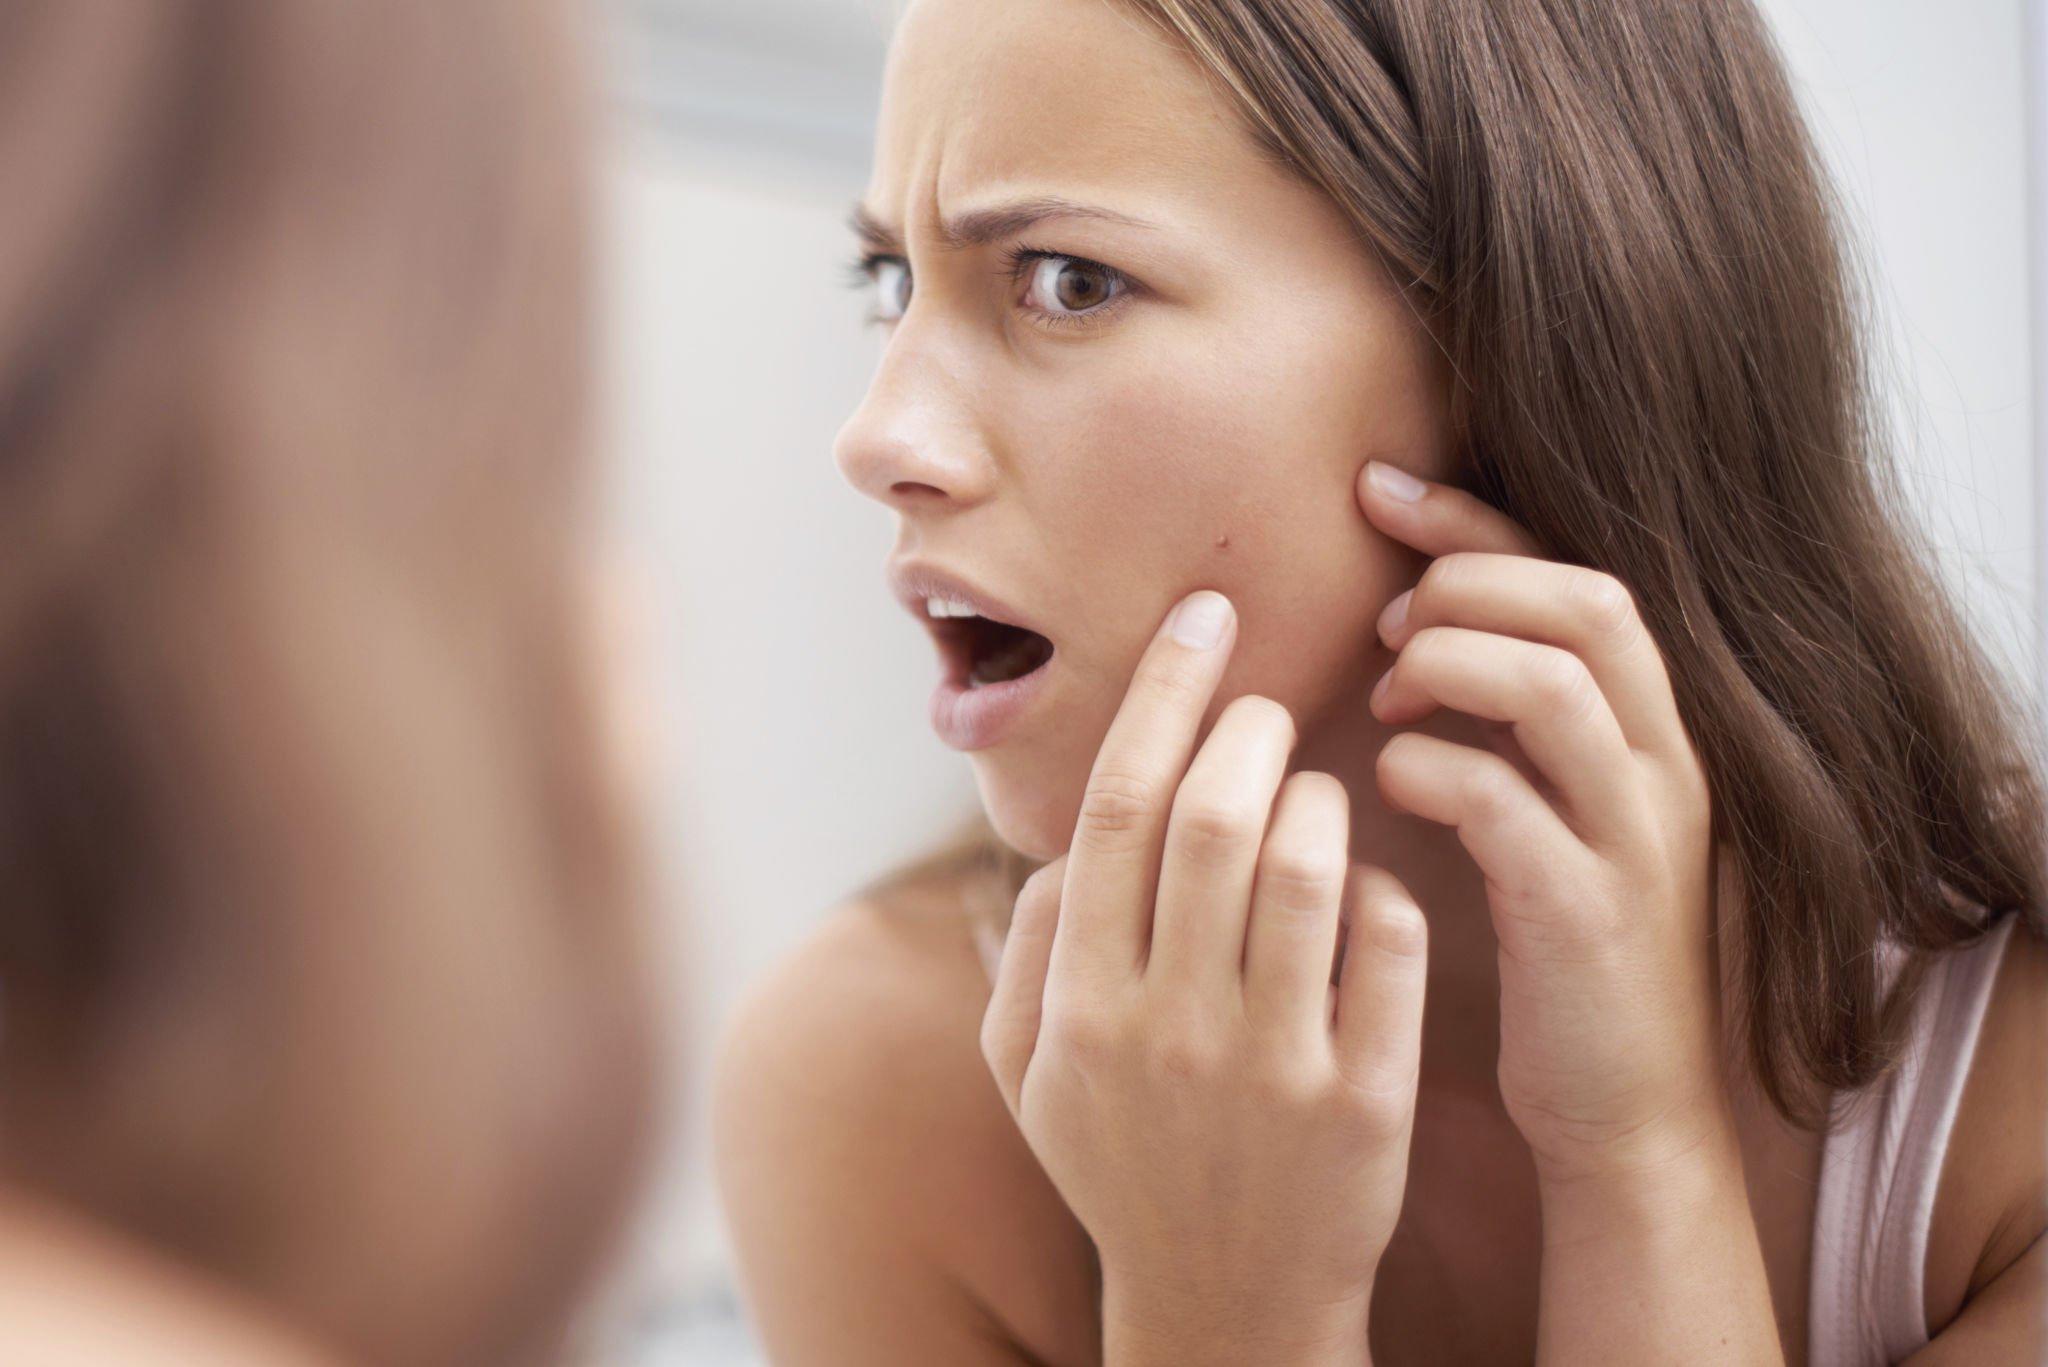 Information on Acne and its Symptoms, Causes, and Treatment